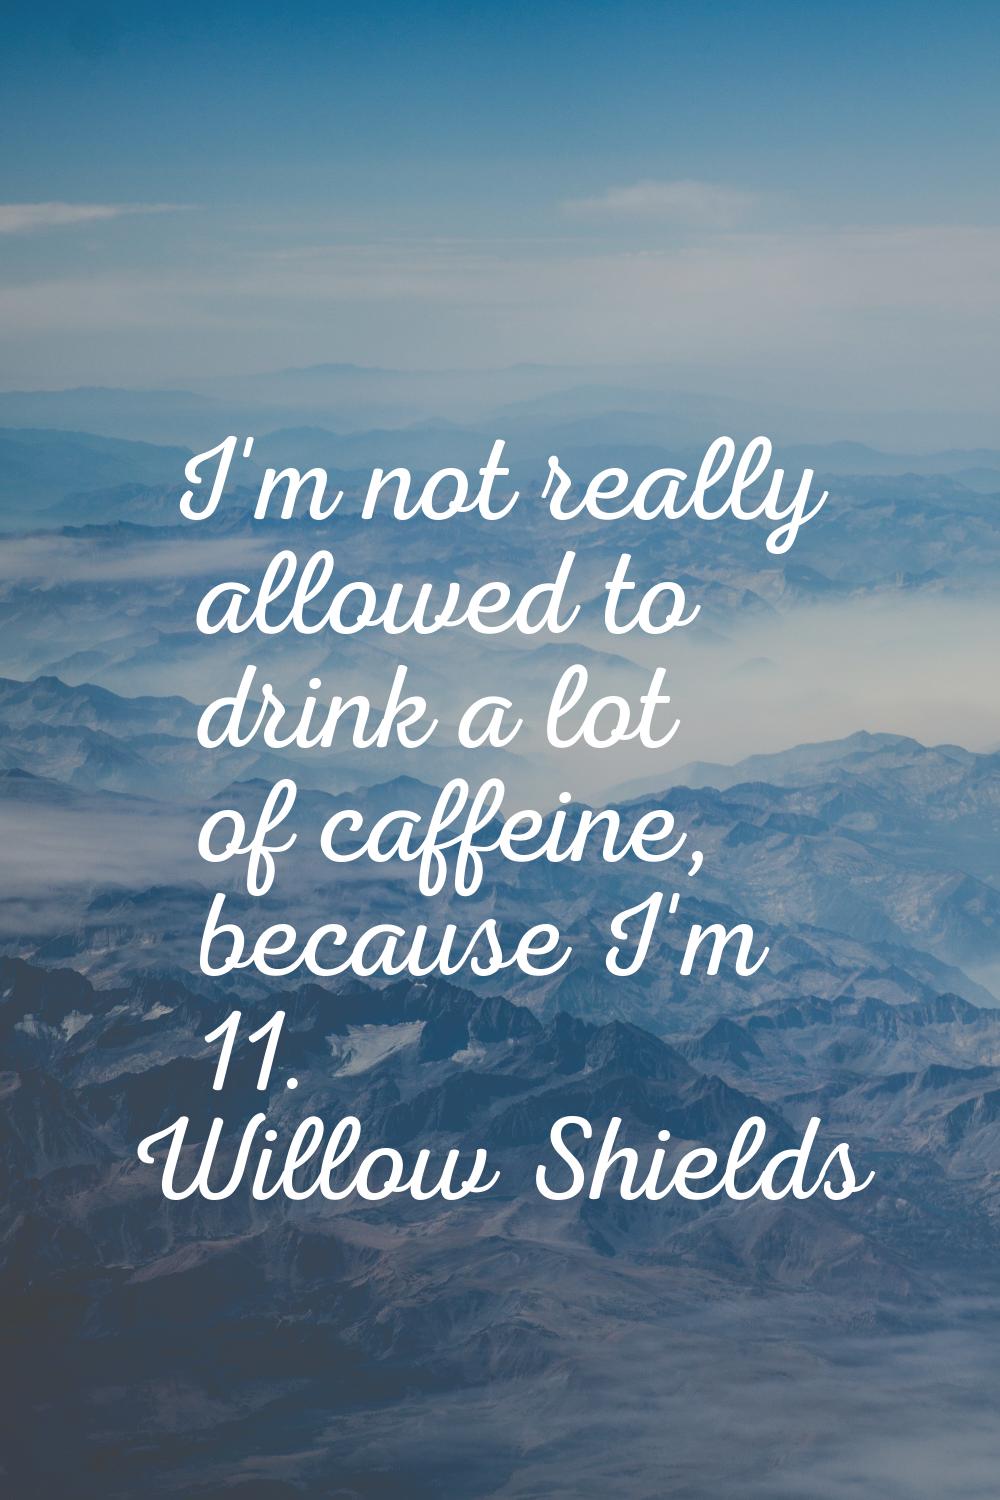 I'm not really allowed to drink a lot of caffeine, because I'm 11.